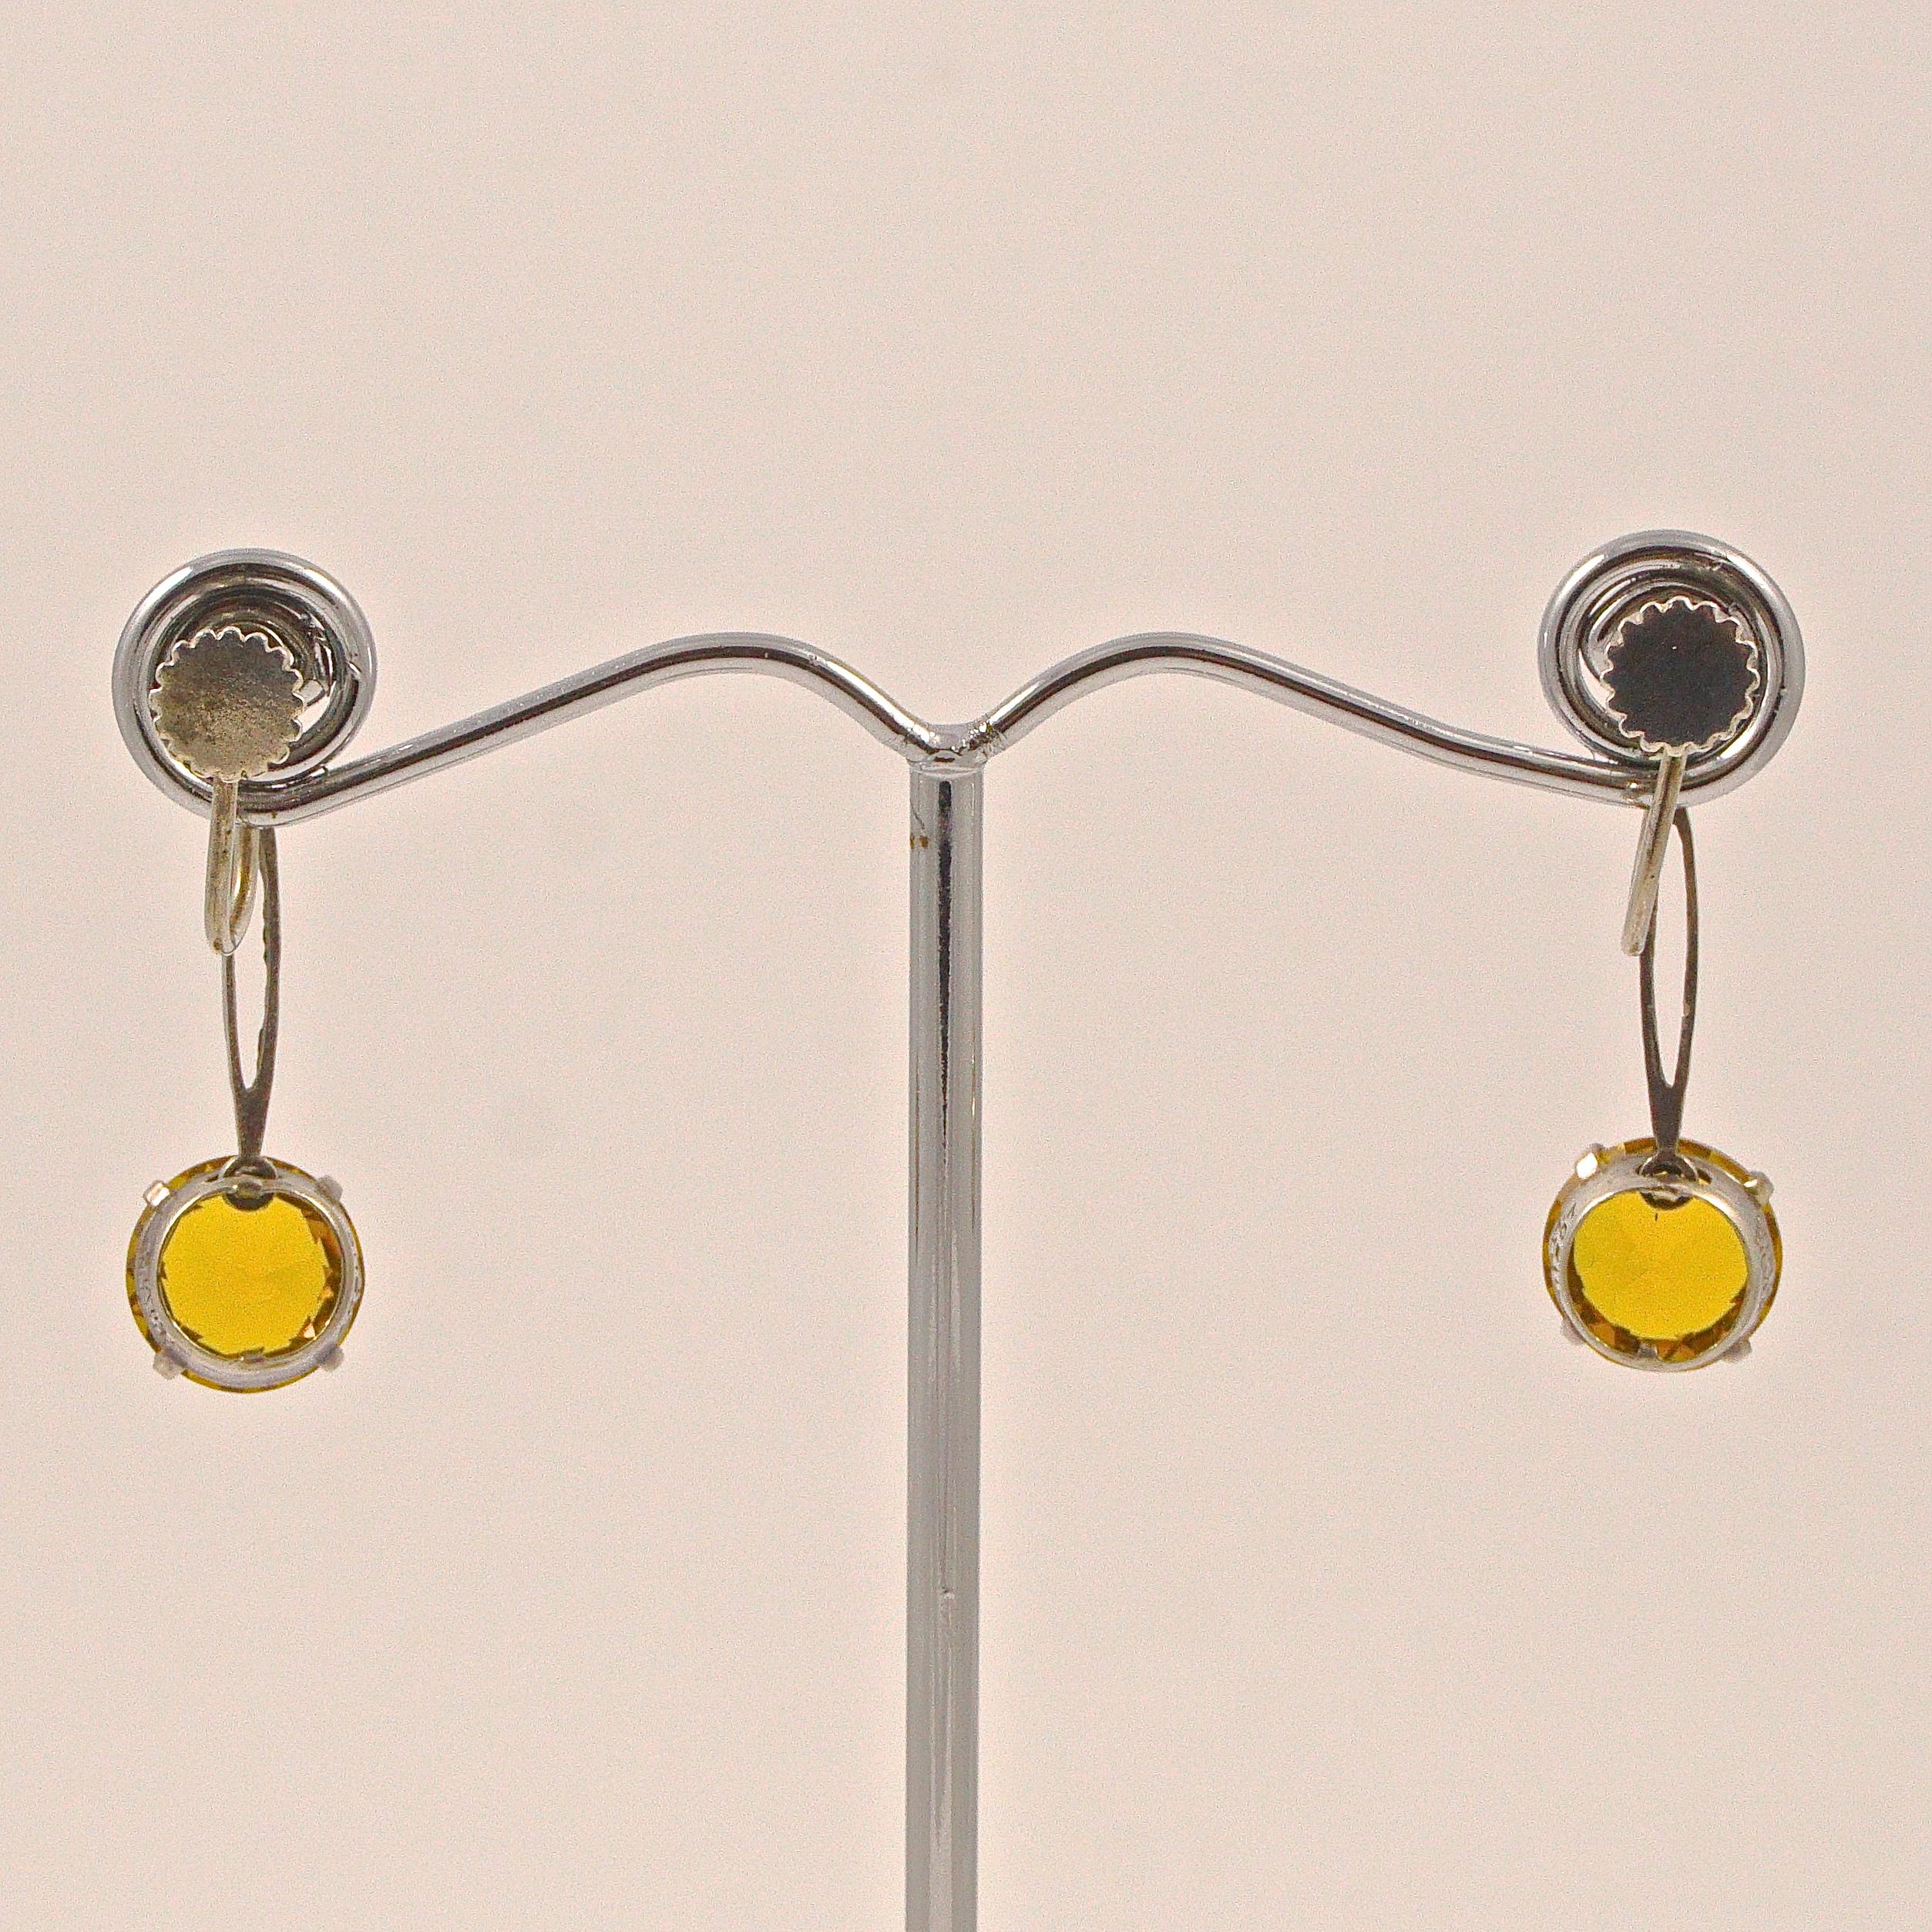 Art Deco Sterling Silver Screw Back Earrings with Faux Citrine Drops circa 1920s In Good Condition For Sale In London, GB